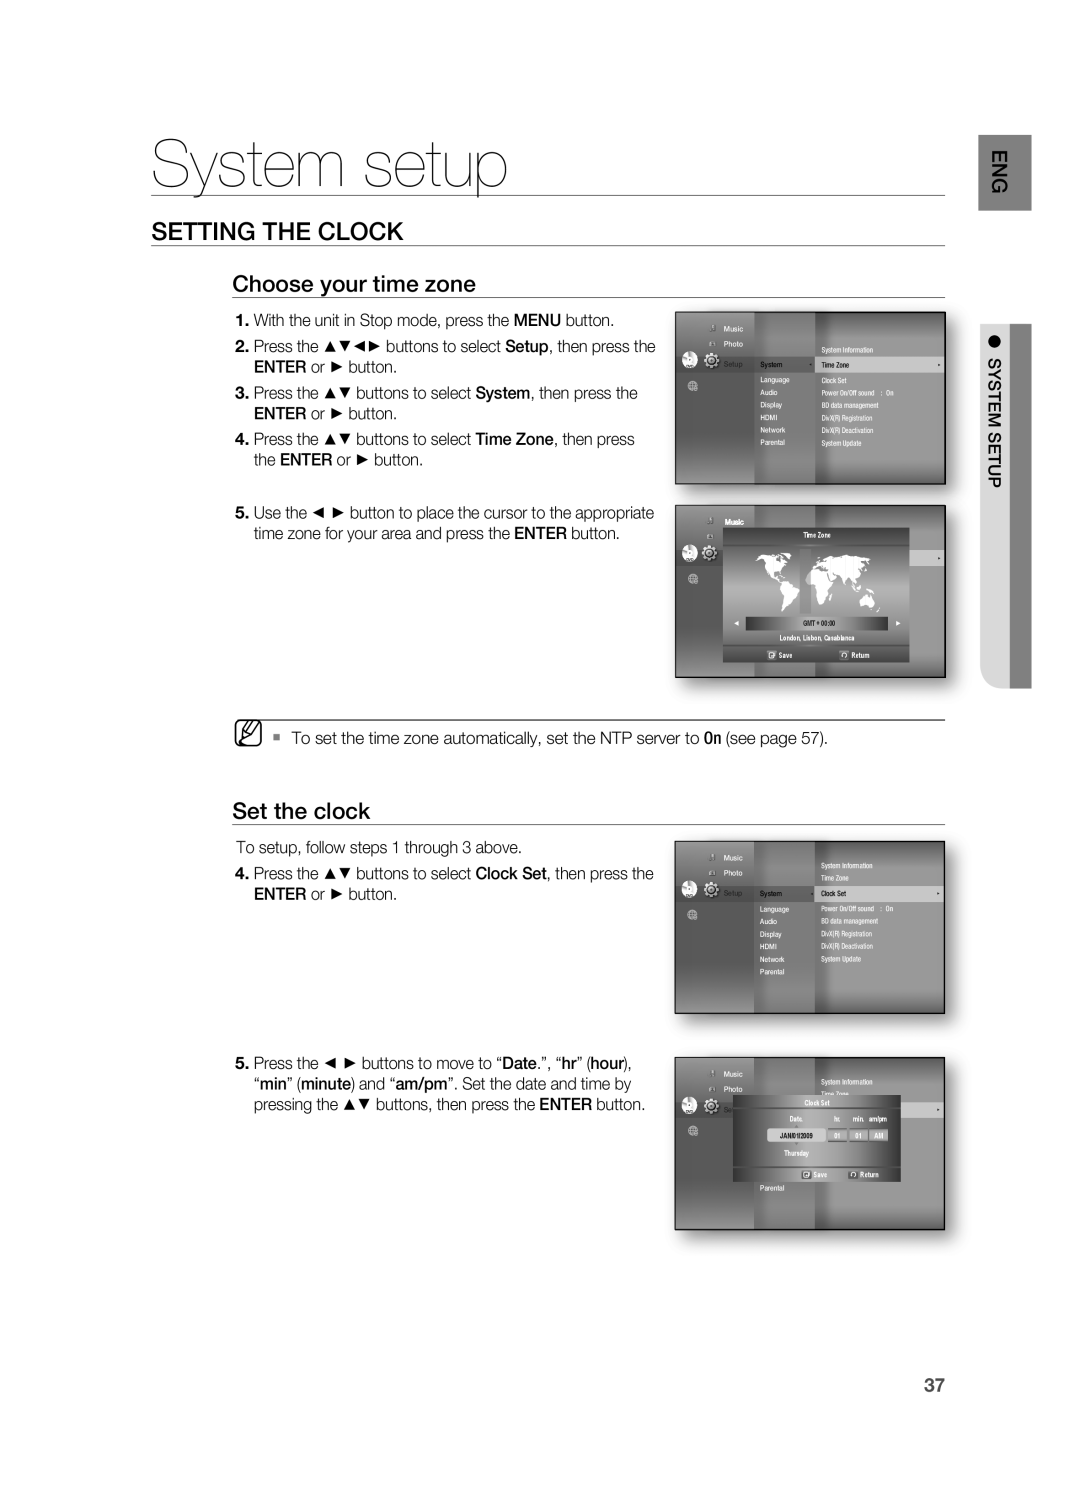 Samsung HT-BD3252 user manual System setup, Setting The Clock, Choose your time zone, Set the clock, ENTER or button 